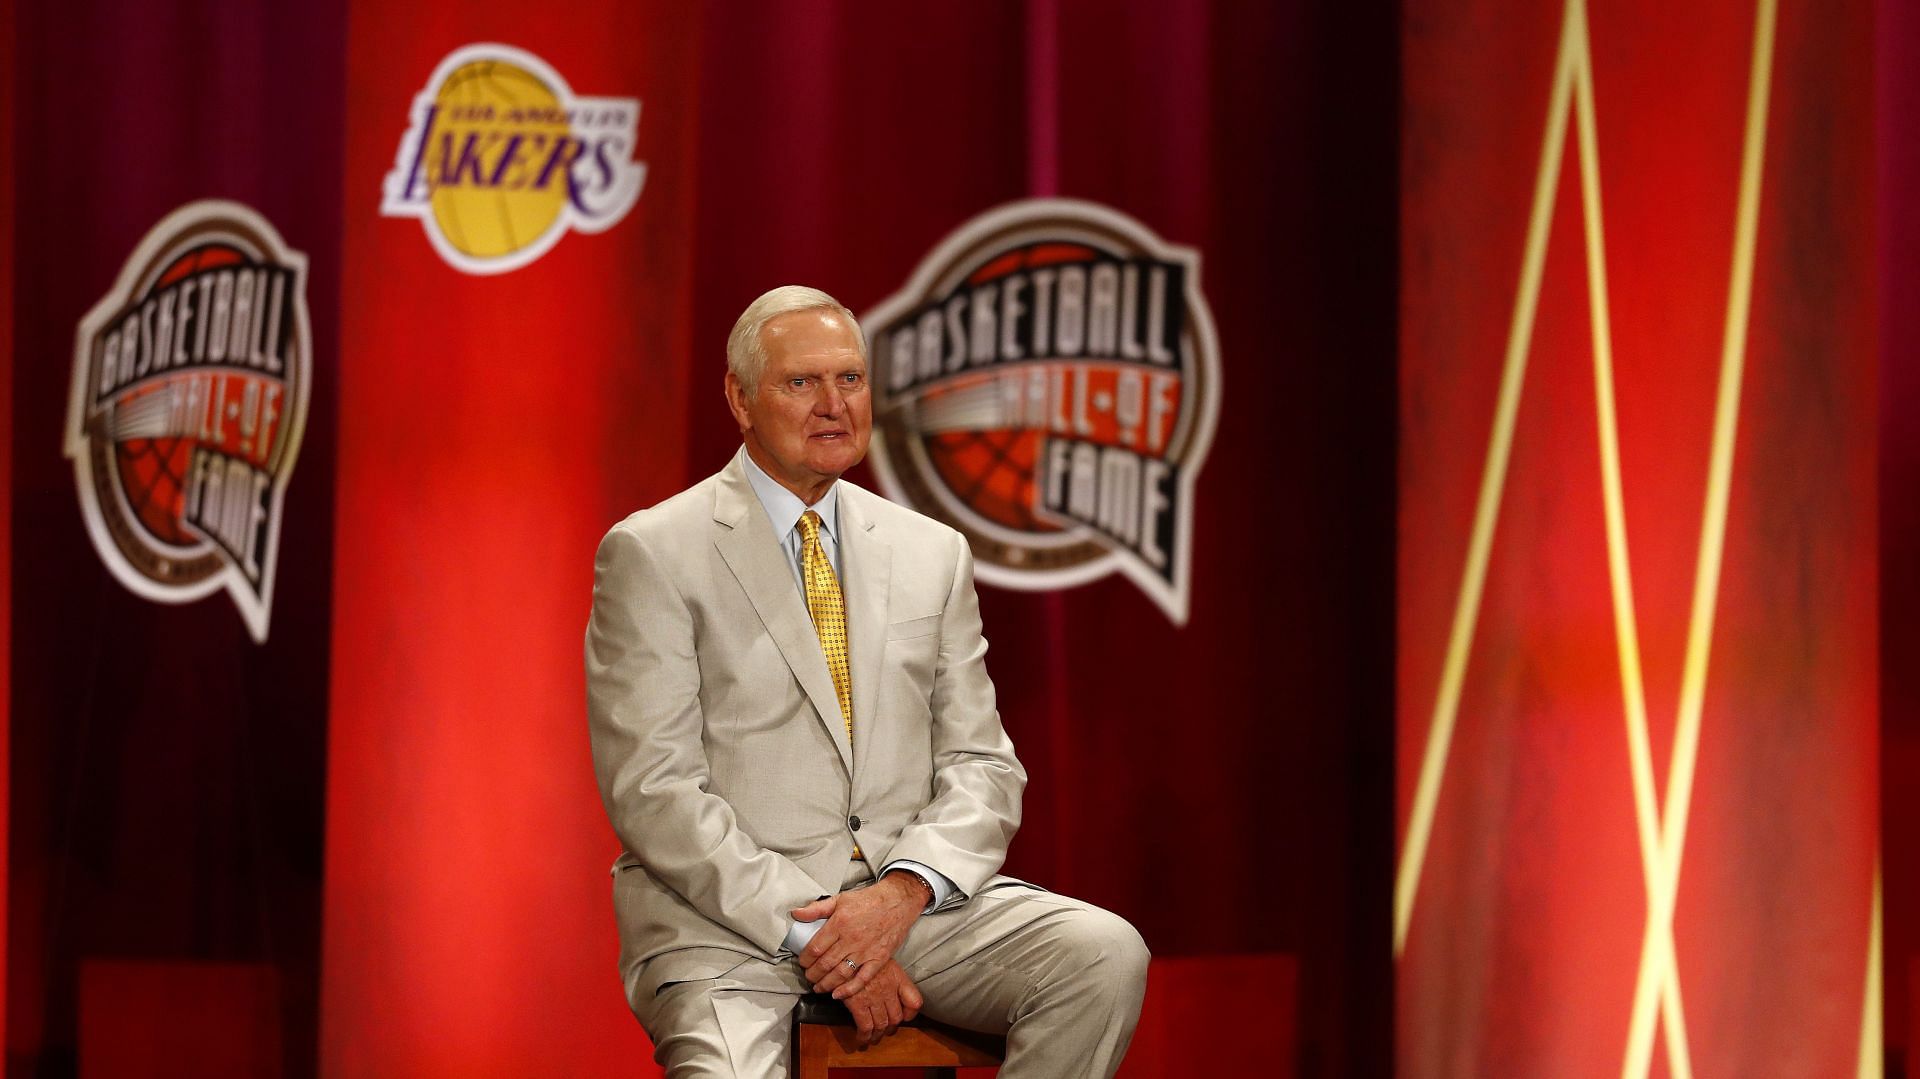 Jerry West looks on during the 2019 Basketball Hall of Fame Enshrinement Ceremony at Symphony Hall on September 06, 2019 in Springfield, Massachusetts.